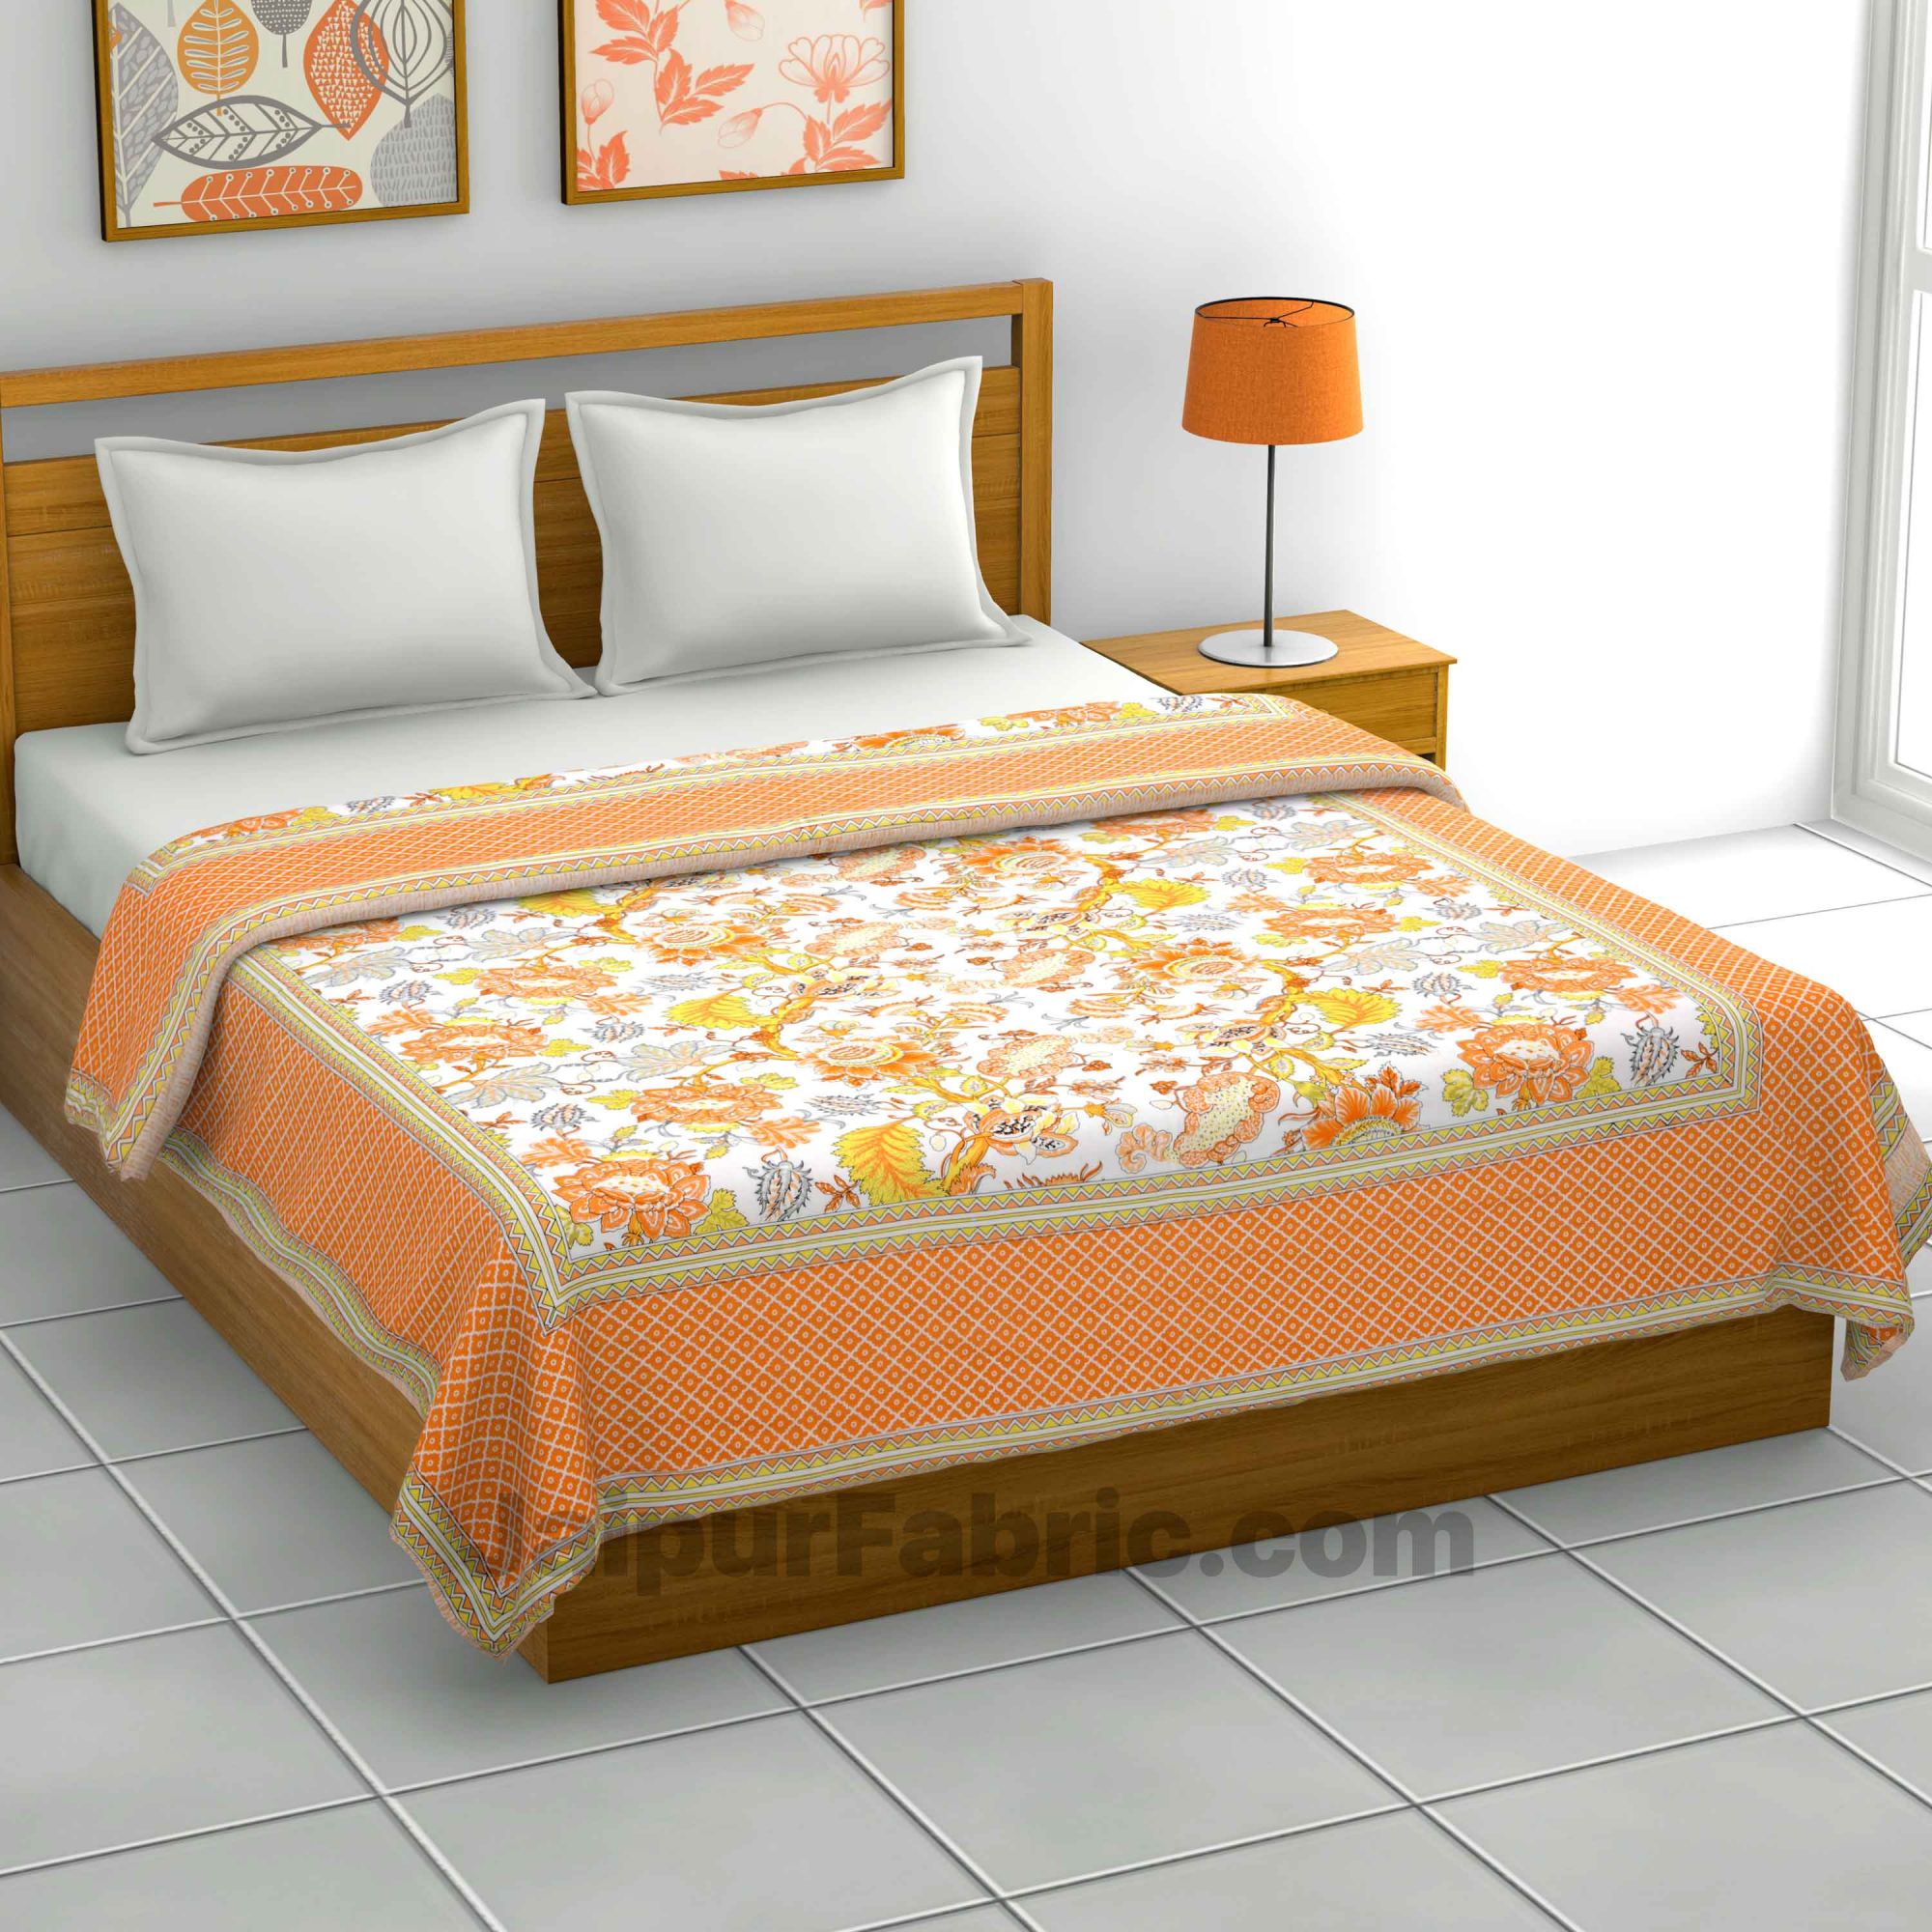 Combo373 Bed in a Bag Orange Floral  1 Dohar + 1 Double BedSheet + 2 Pillow Covers